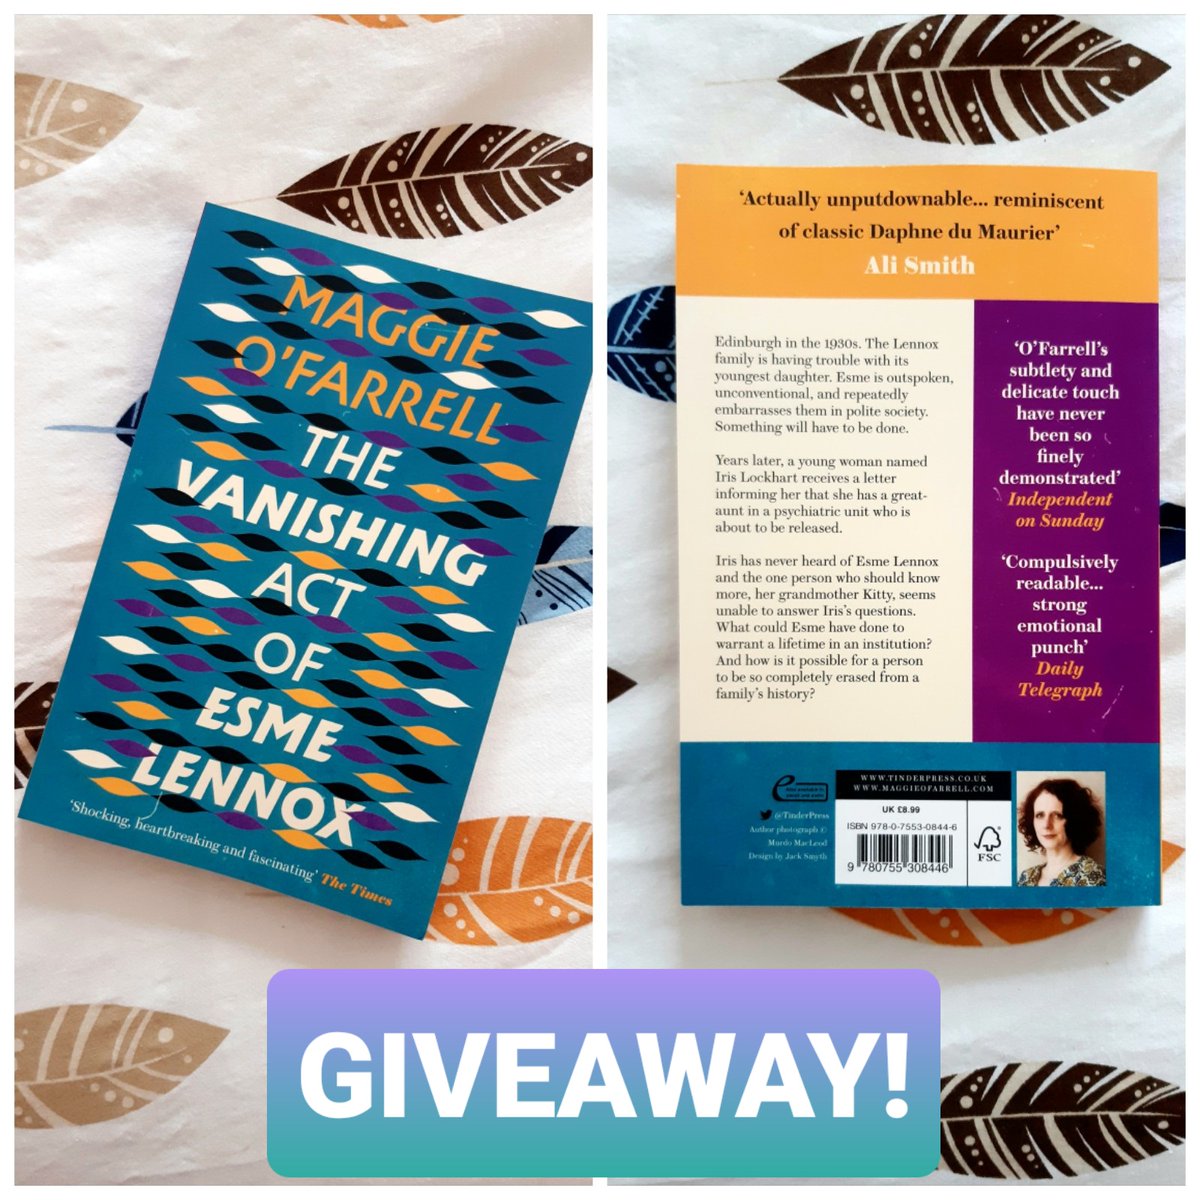 I received the latest @HachetteUK Feminist Book Box yesterday, which means I now have 2 copies of #TheVanishingActOfEsmeLennox by #MaggieOFarrell 💜💛💙
-
I'm giving away the spare copy I  received, so if you'd like to enter the draw see below 🥰📚

#BookTwitter #bookgiveaway